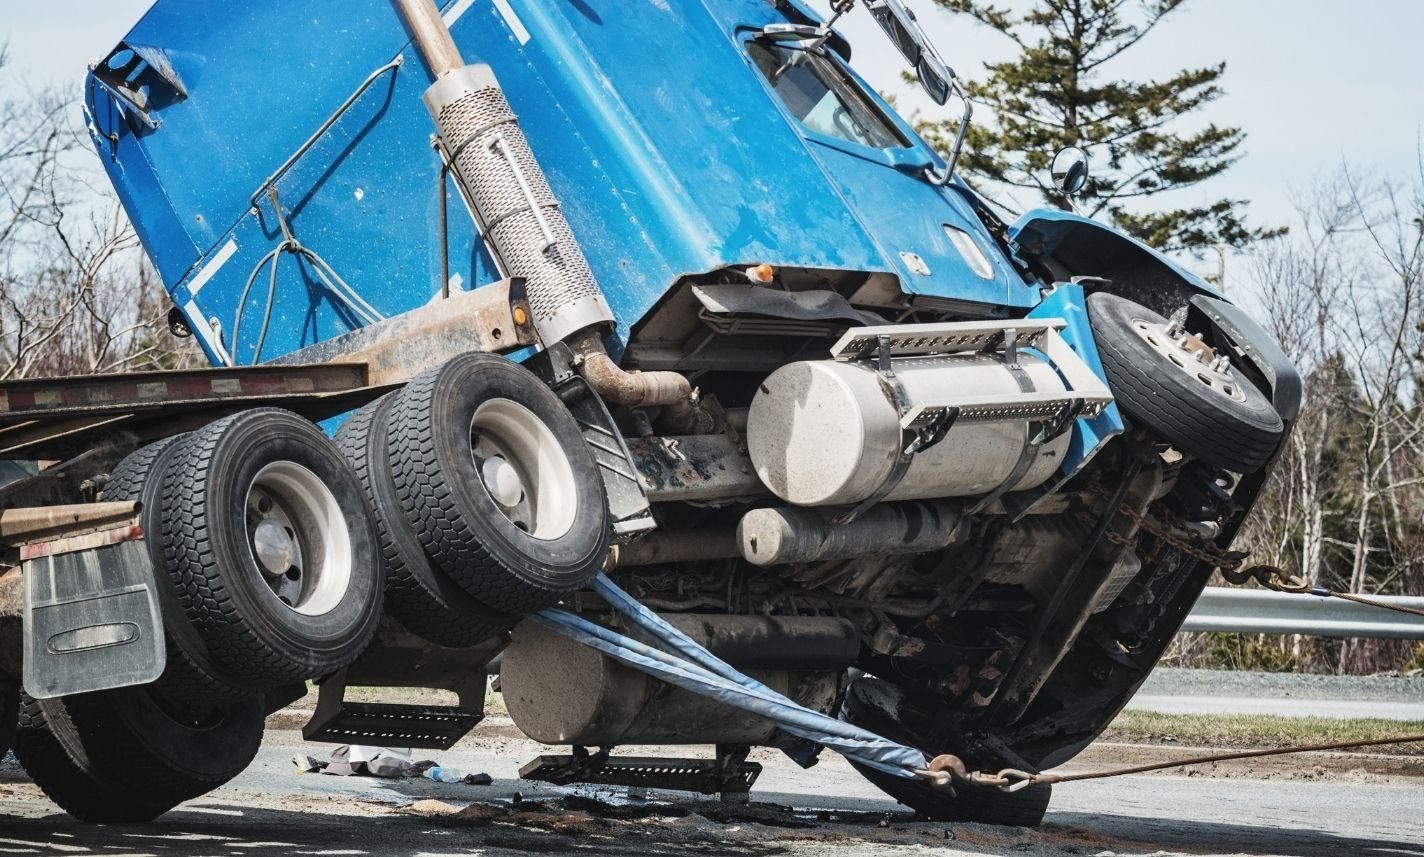 woolsey-commercial-truck-accident-injury-lawyer